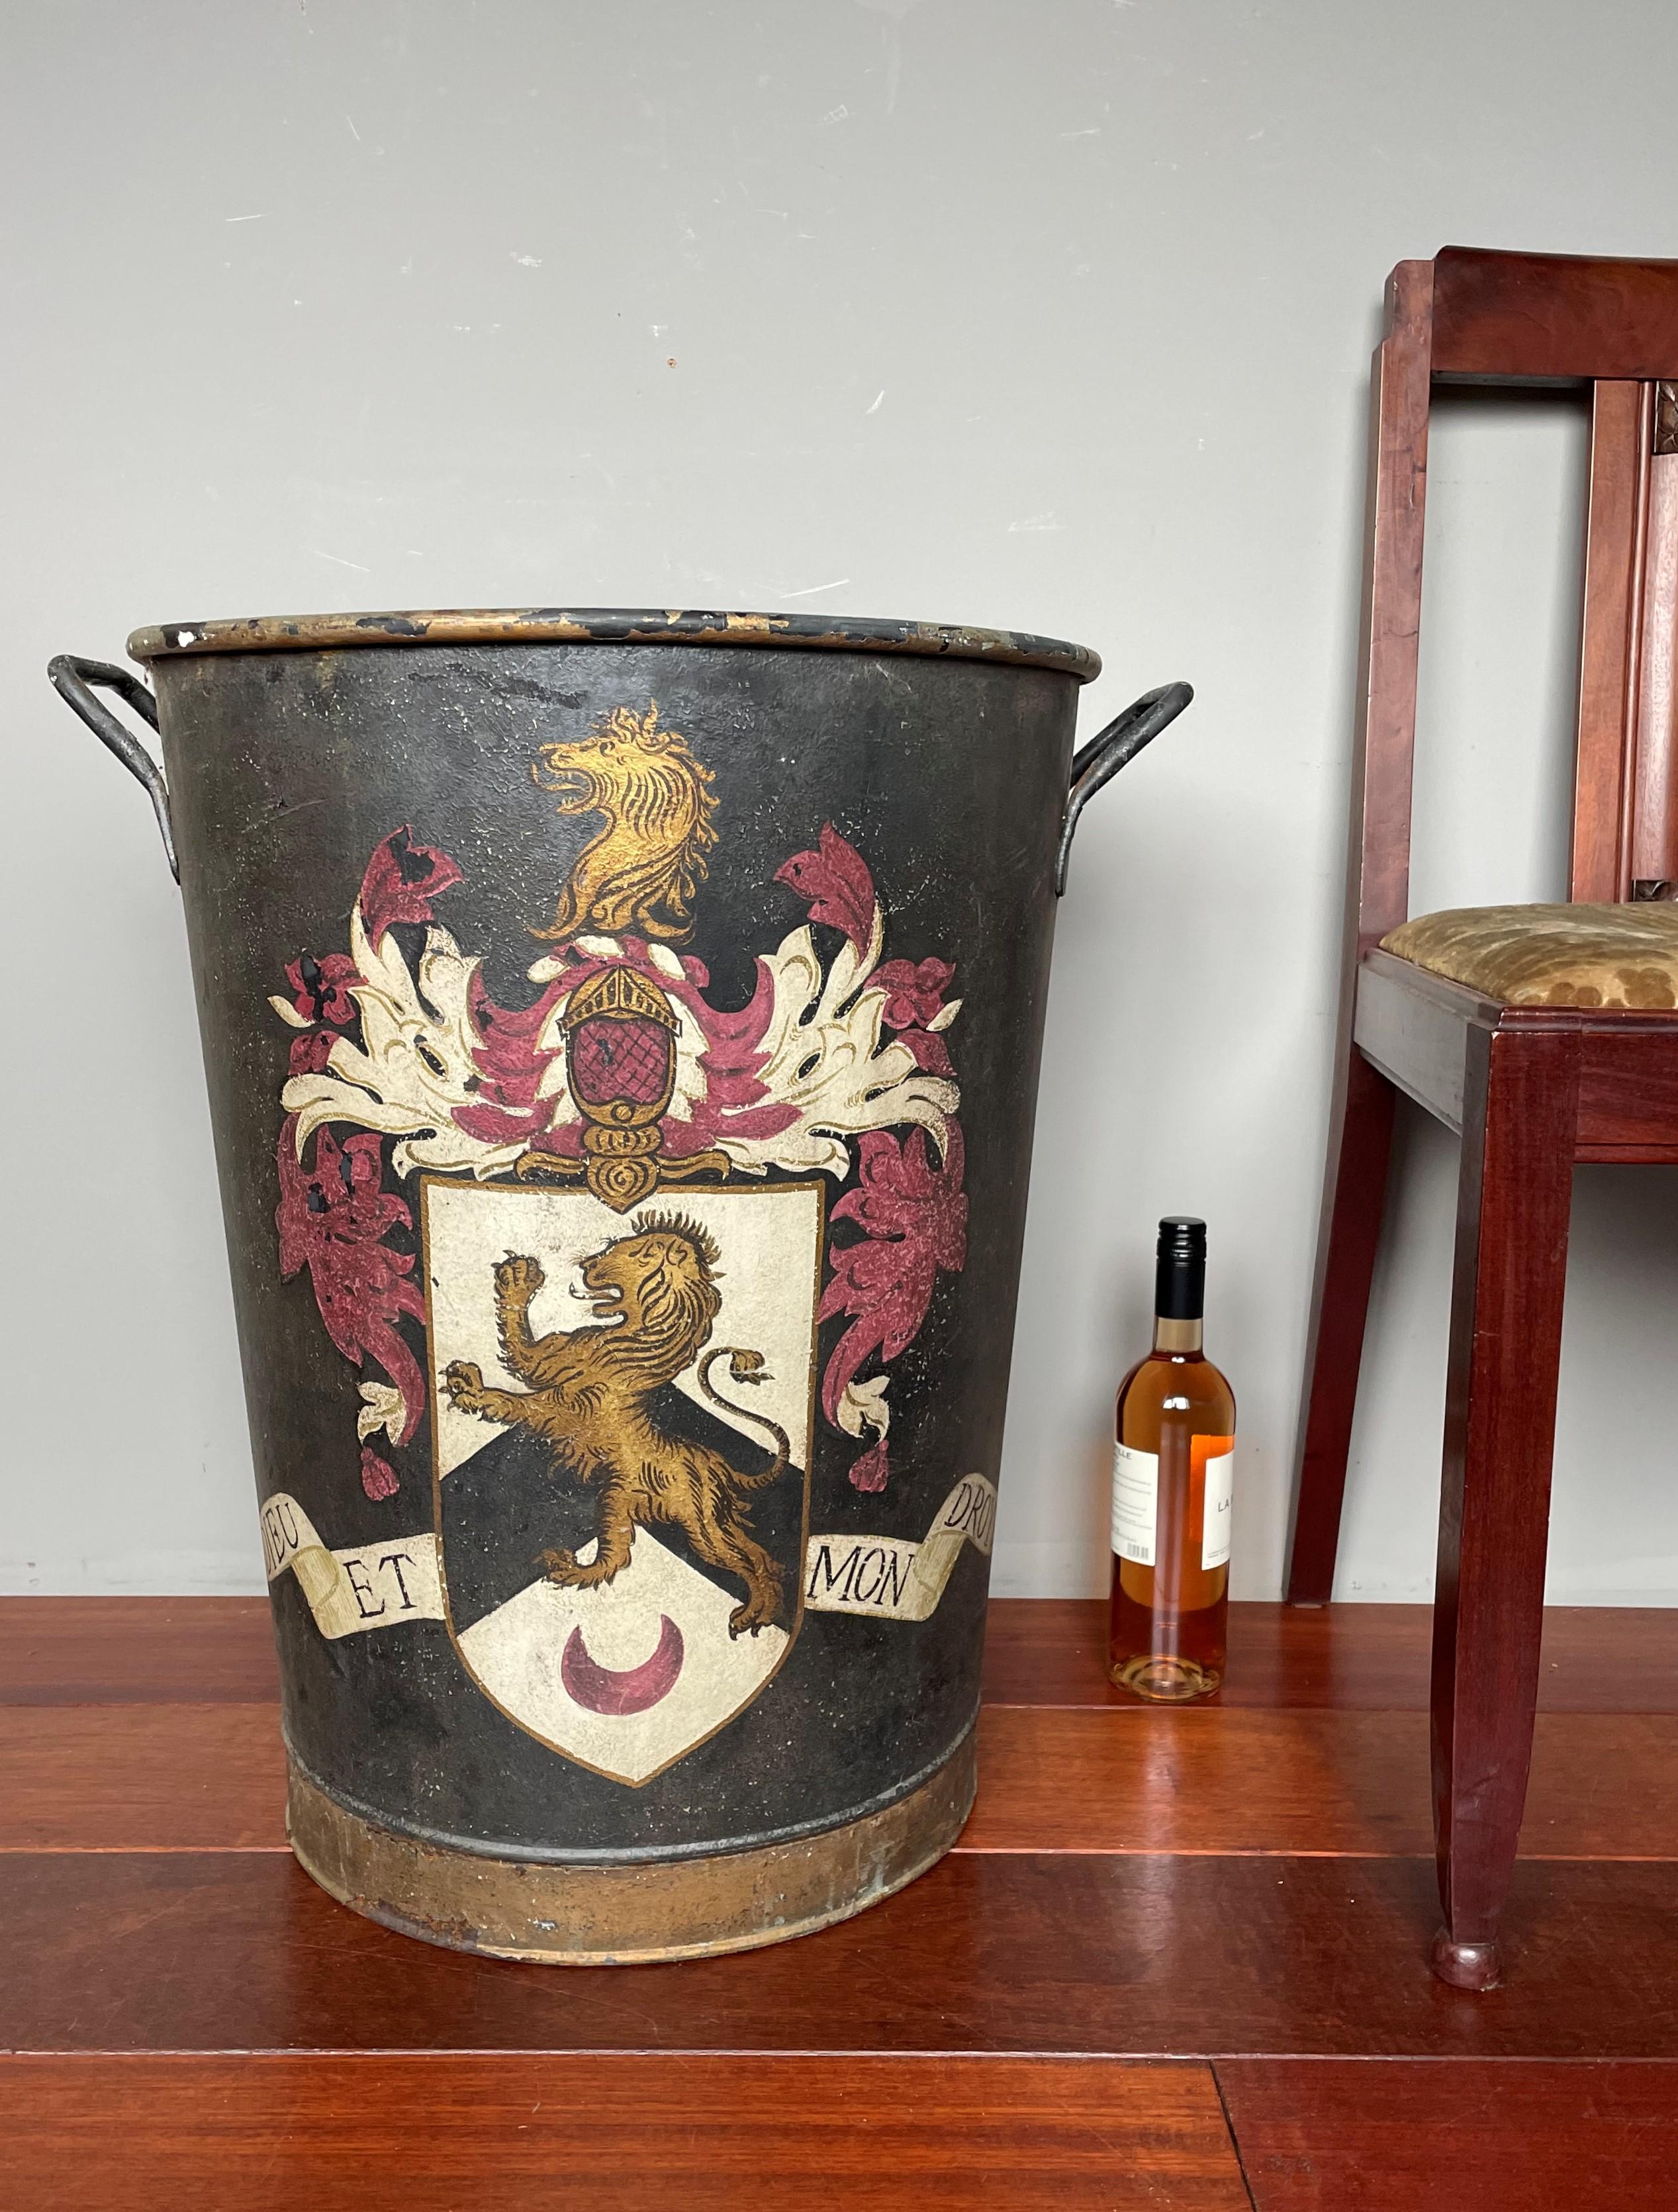 Iron Largest Antique Firewood Bucket / Planter with British Crest 'God and My Right'